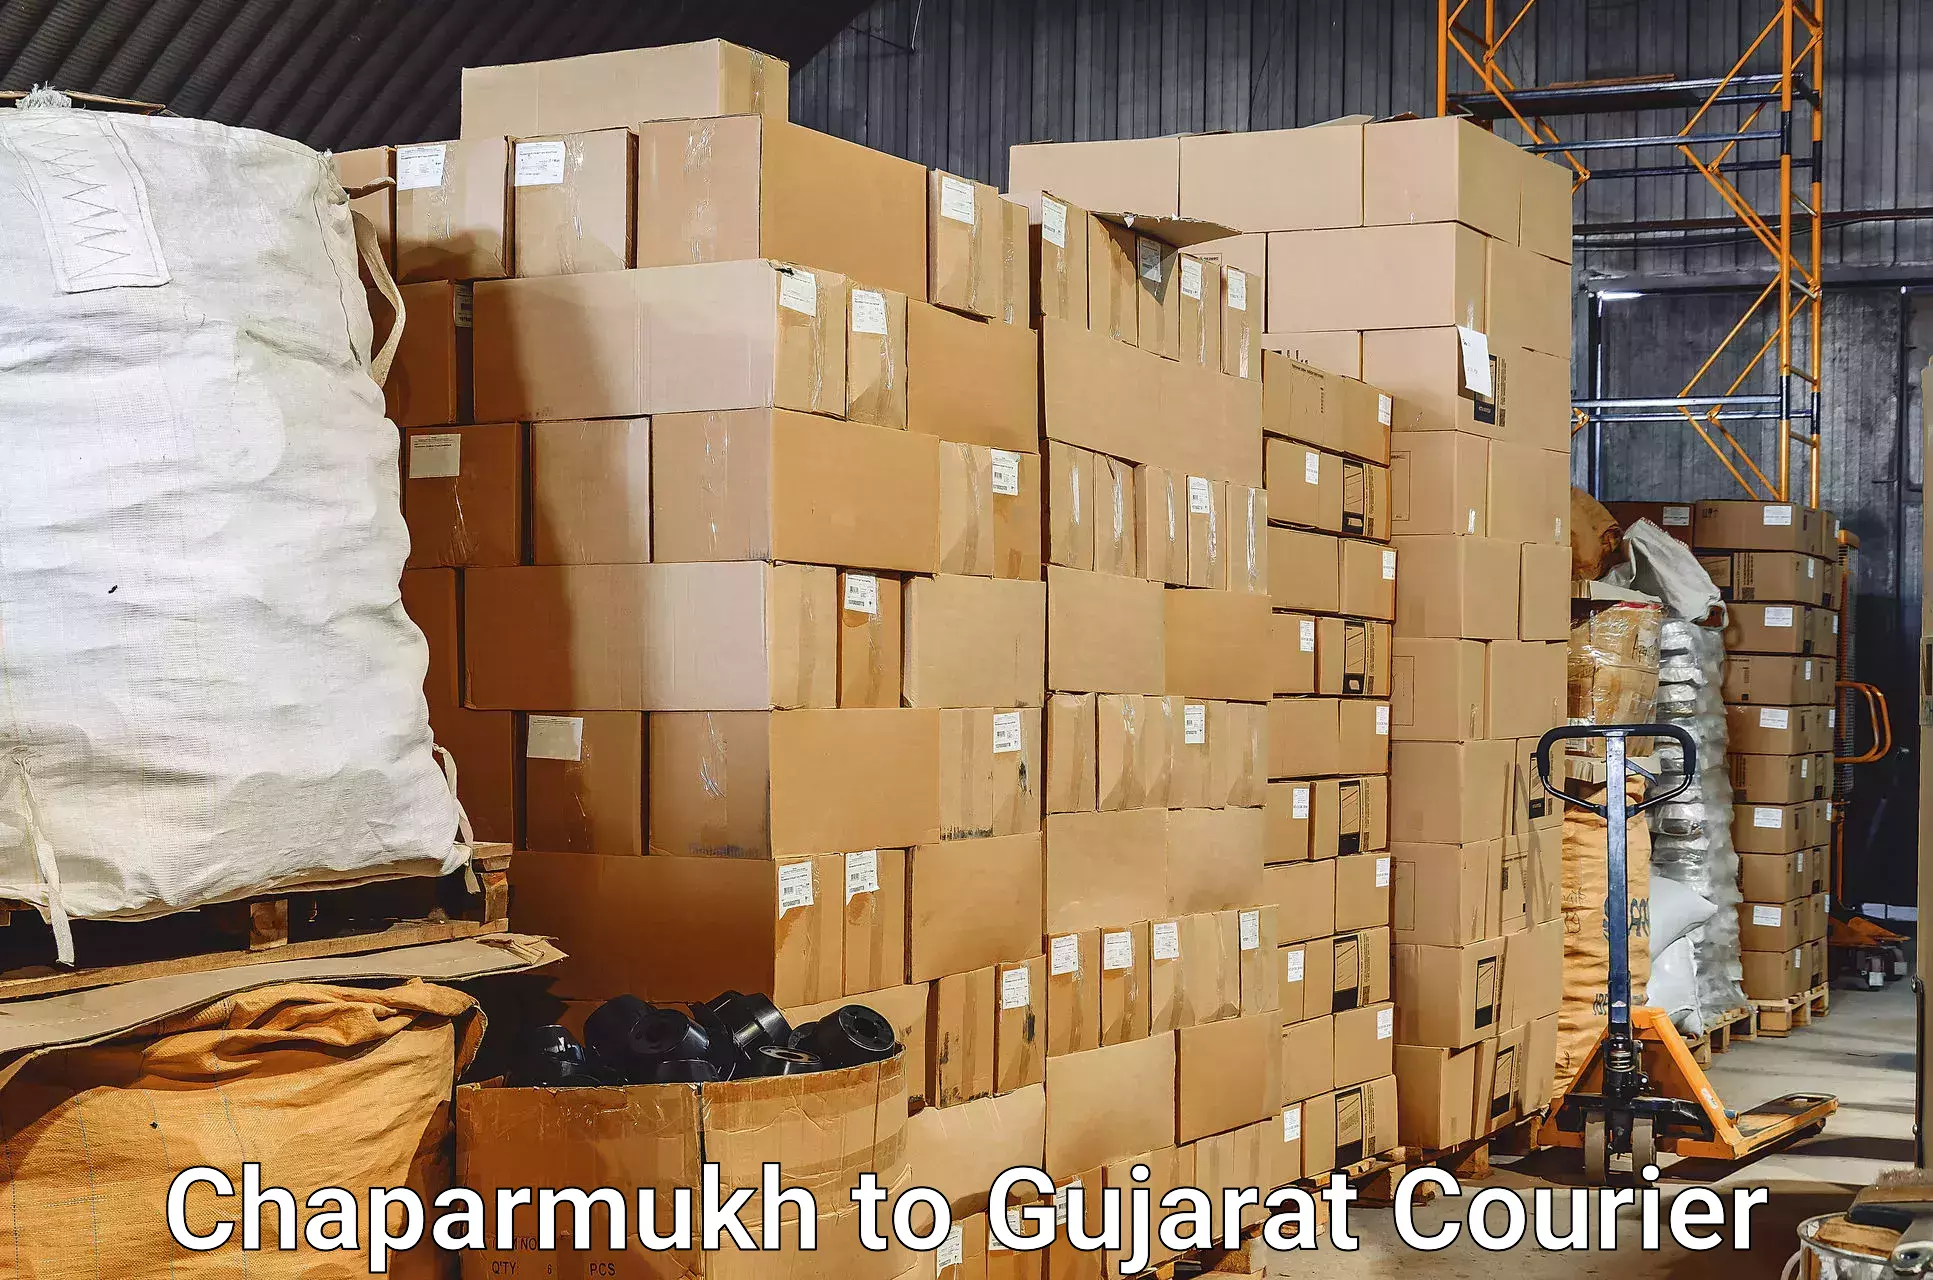 Instant baggage transport quote Chaparmukh to Nadiad